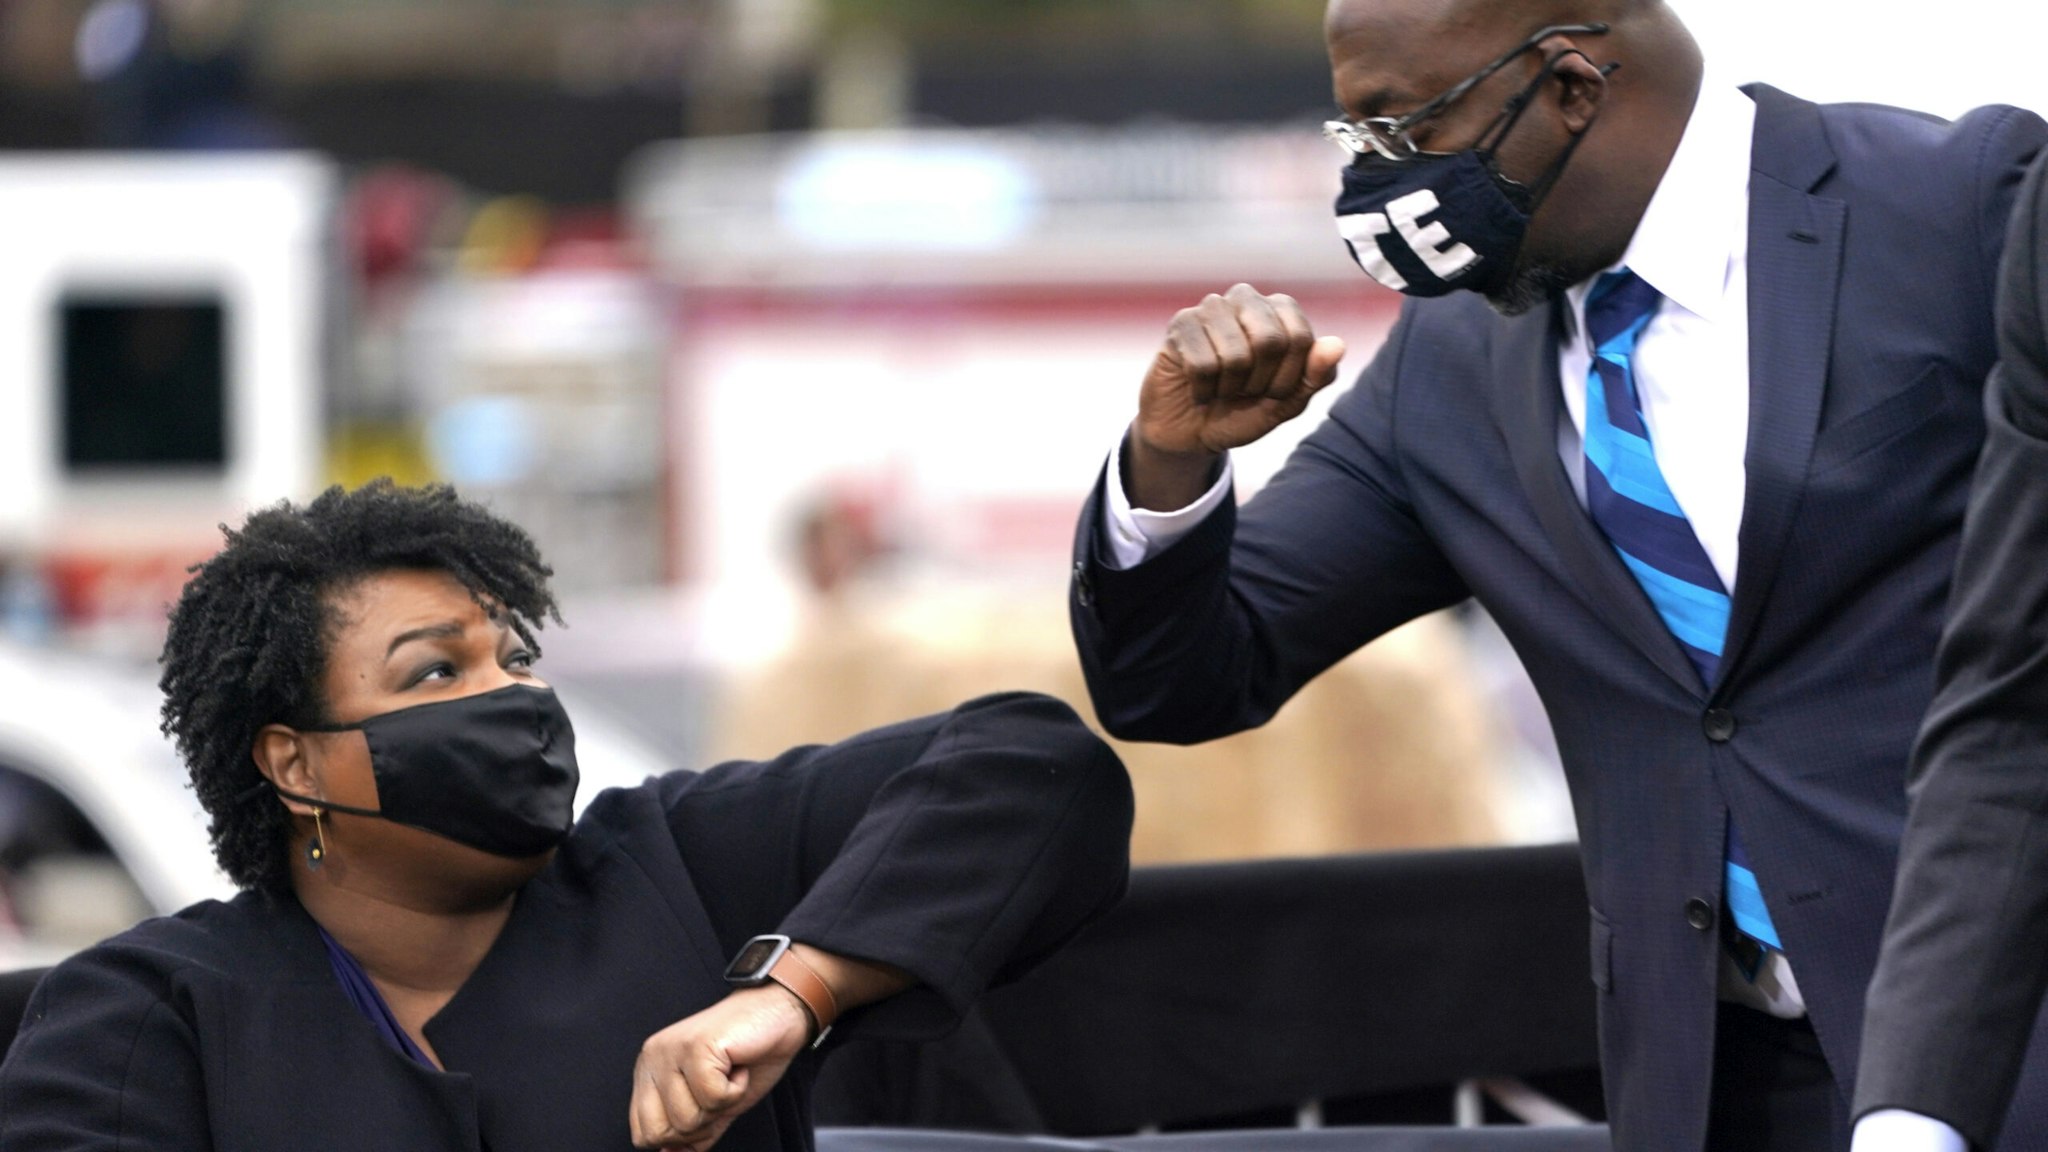 ATLANTA, GA - DECEMBER 15: U.S. Democratic Senate candidate Raphael Warnock (R) bumps elbows with Stacey Abrams (L) during a campaign rally with U.S. President-elect Joe Biden at Pullman Yard on December 15, 2020 in Atlanta, Georgia. Biden’s stop in Georgia comes less than a month before the January 5 runoff election for Senate candidates Jon Ossoff and Raphael Warnock as they try to unseat Republican incumbents Sen. David Perdue and Sen. Kelly Loeffler.